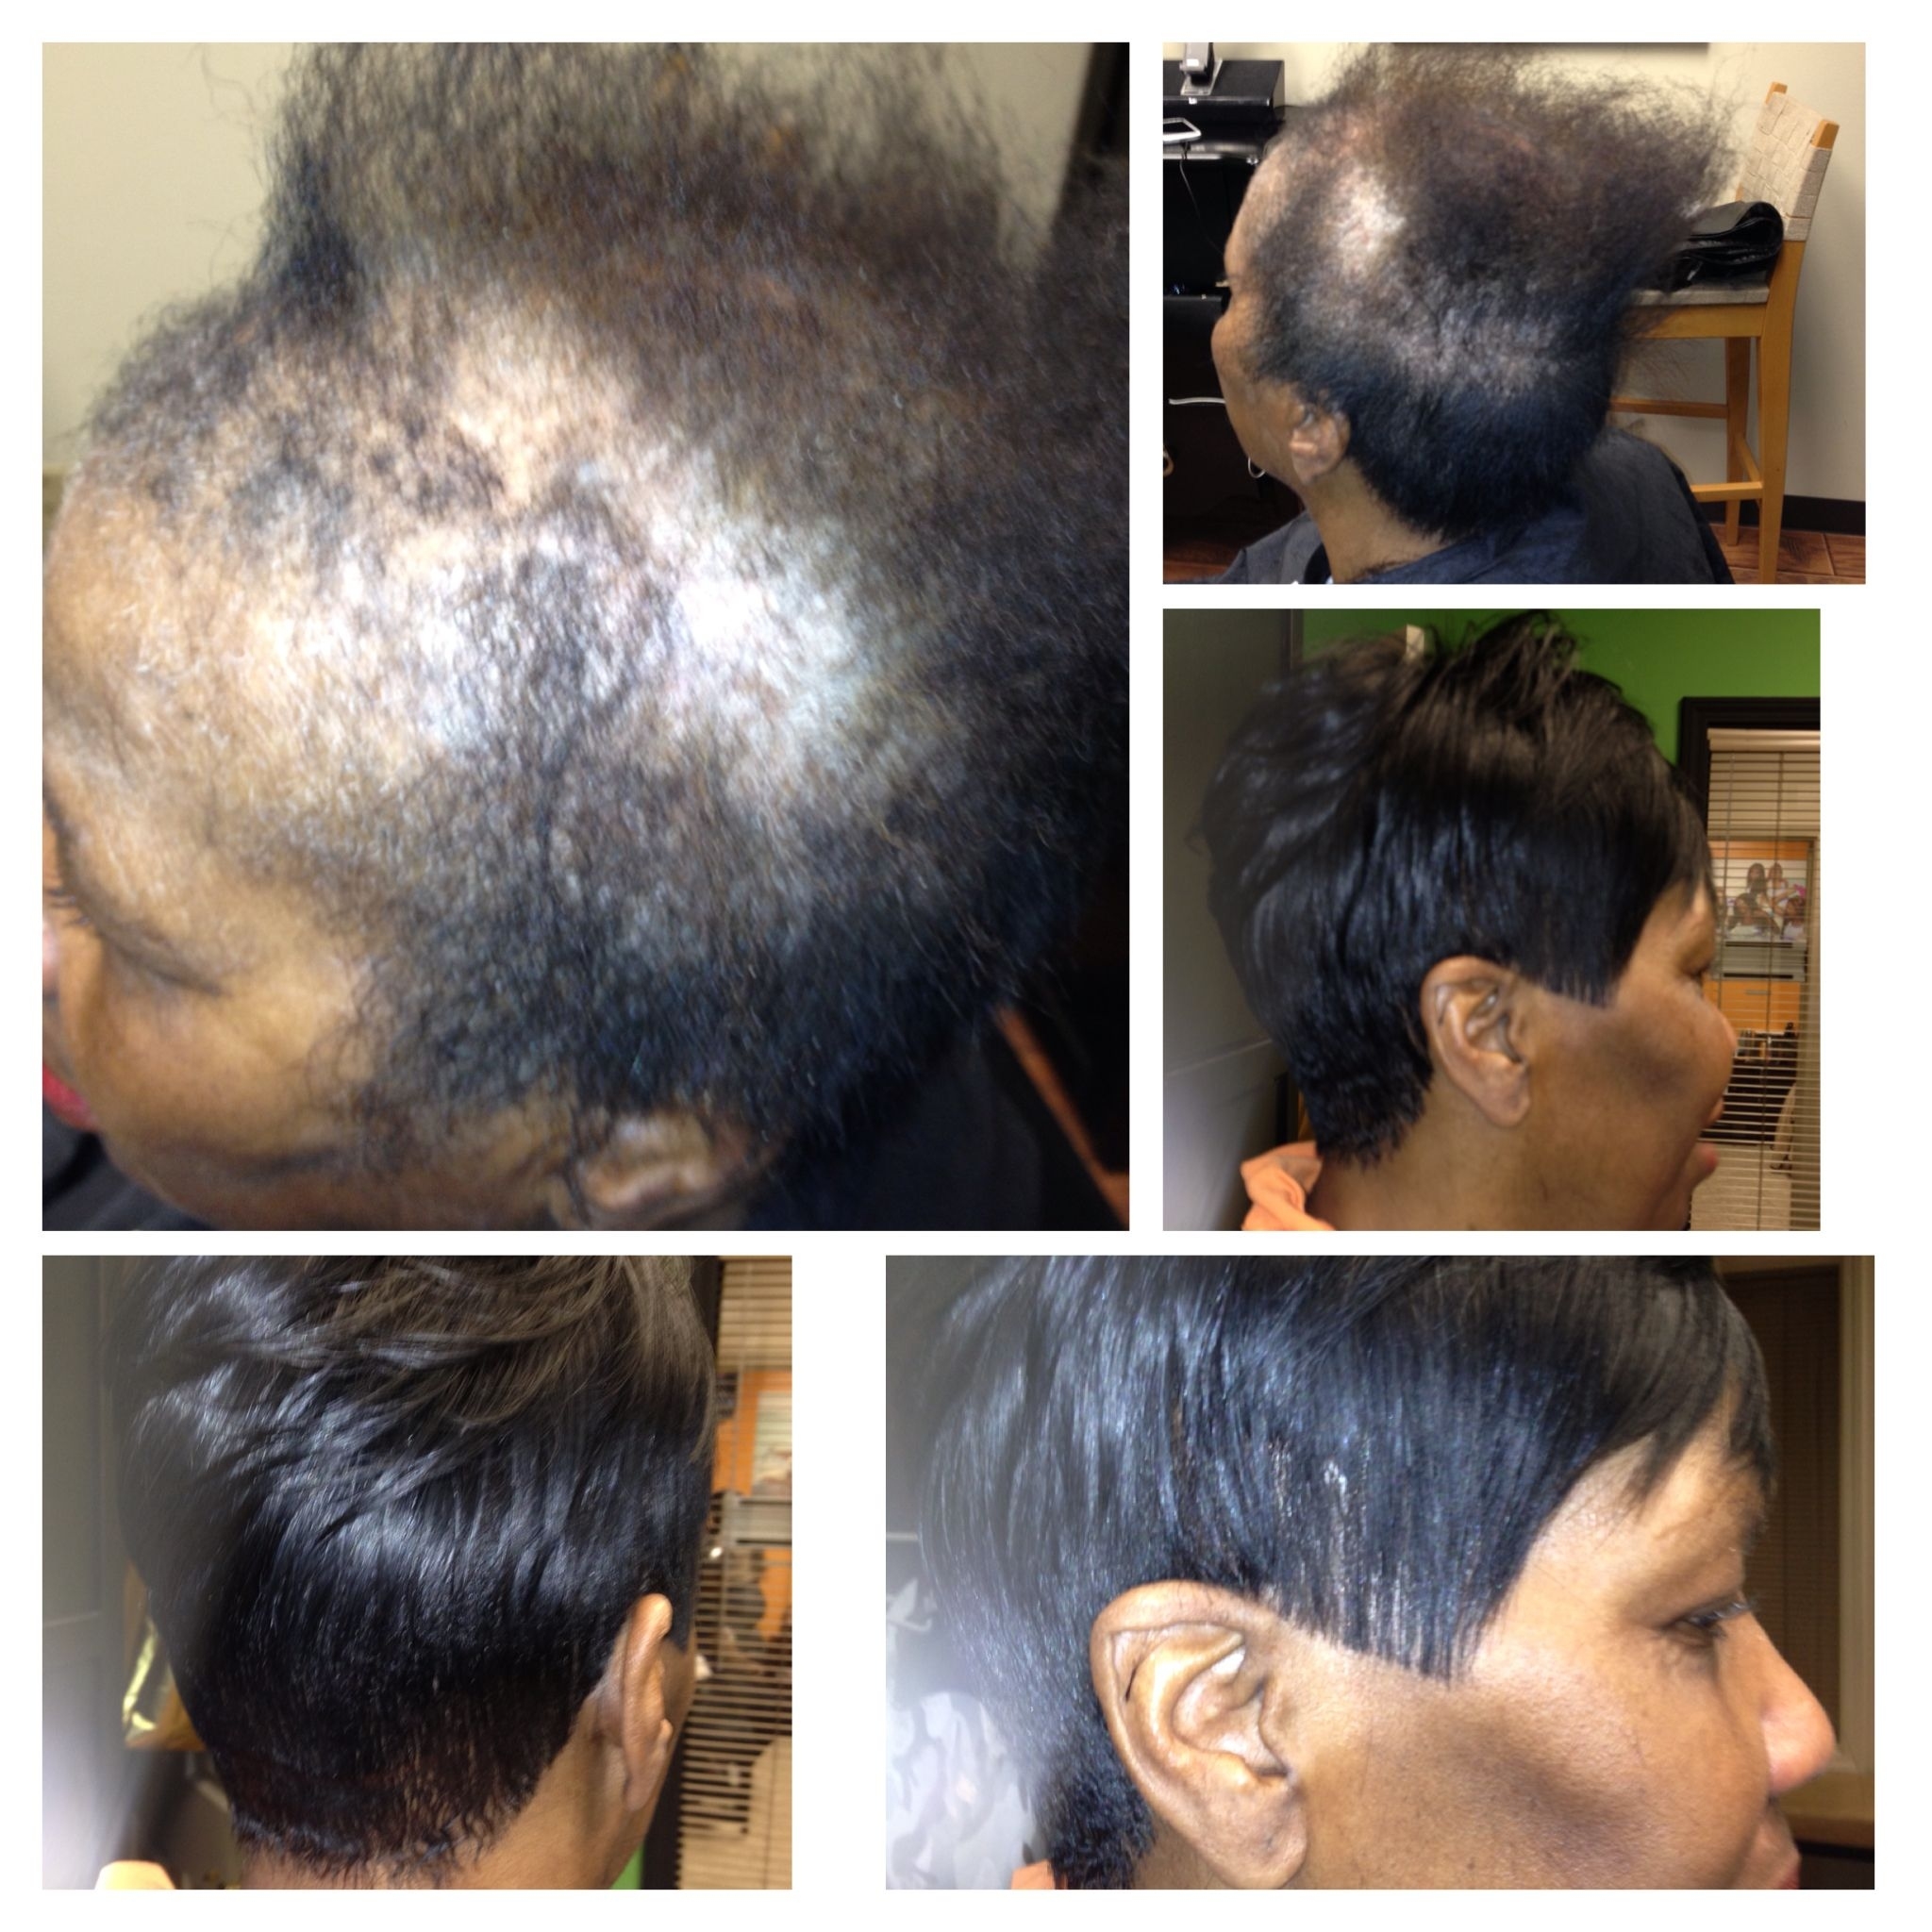 Full Custom Sewin 'no Glue' Natural Looking Sewin Thinning intended for Black Hairstyles For Alopecia